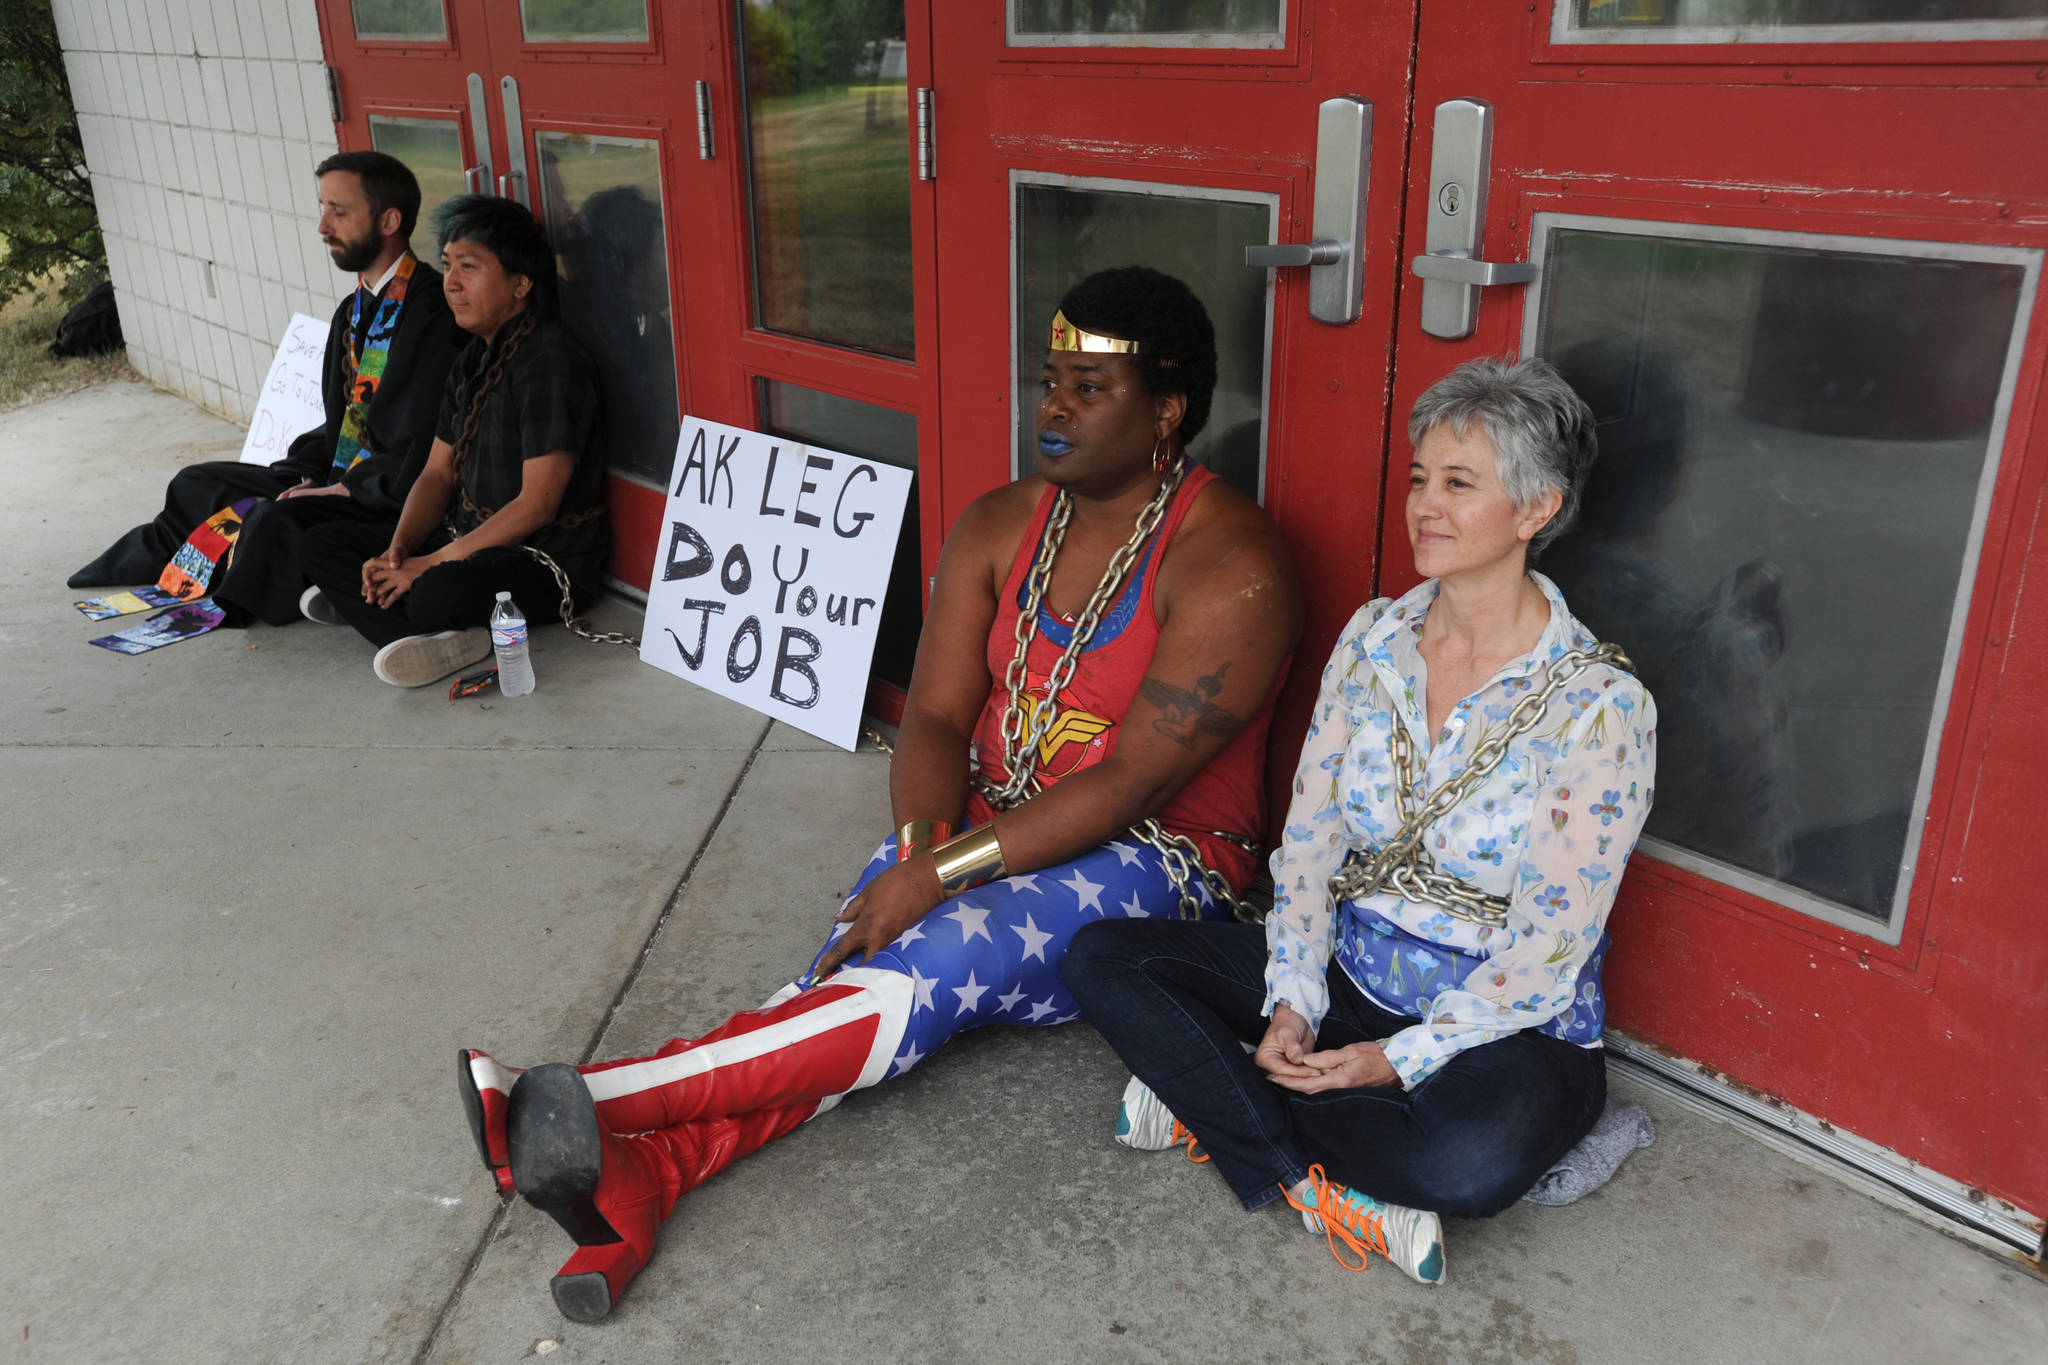 Protesters wore chains as they blocked doors at Wasilla Middle School before the legislative special session on Wednesday, July 10, 2019. (Bill Roth / ADN)